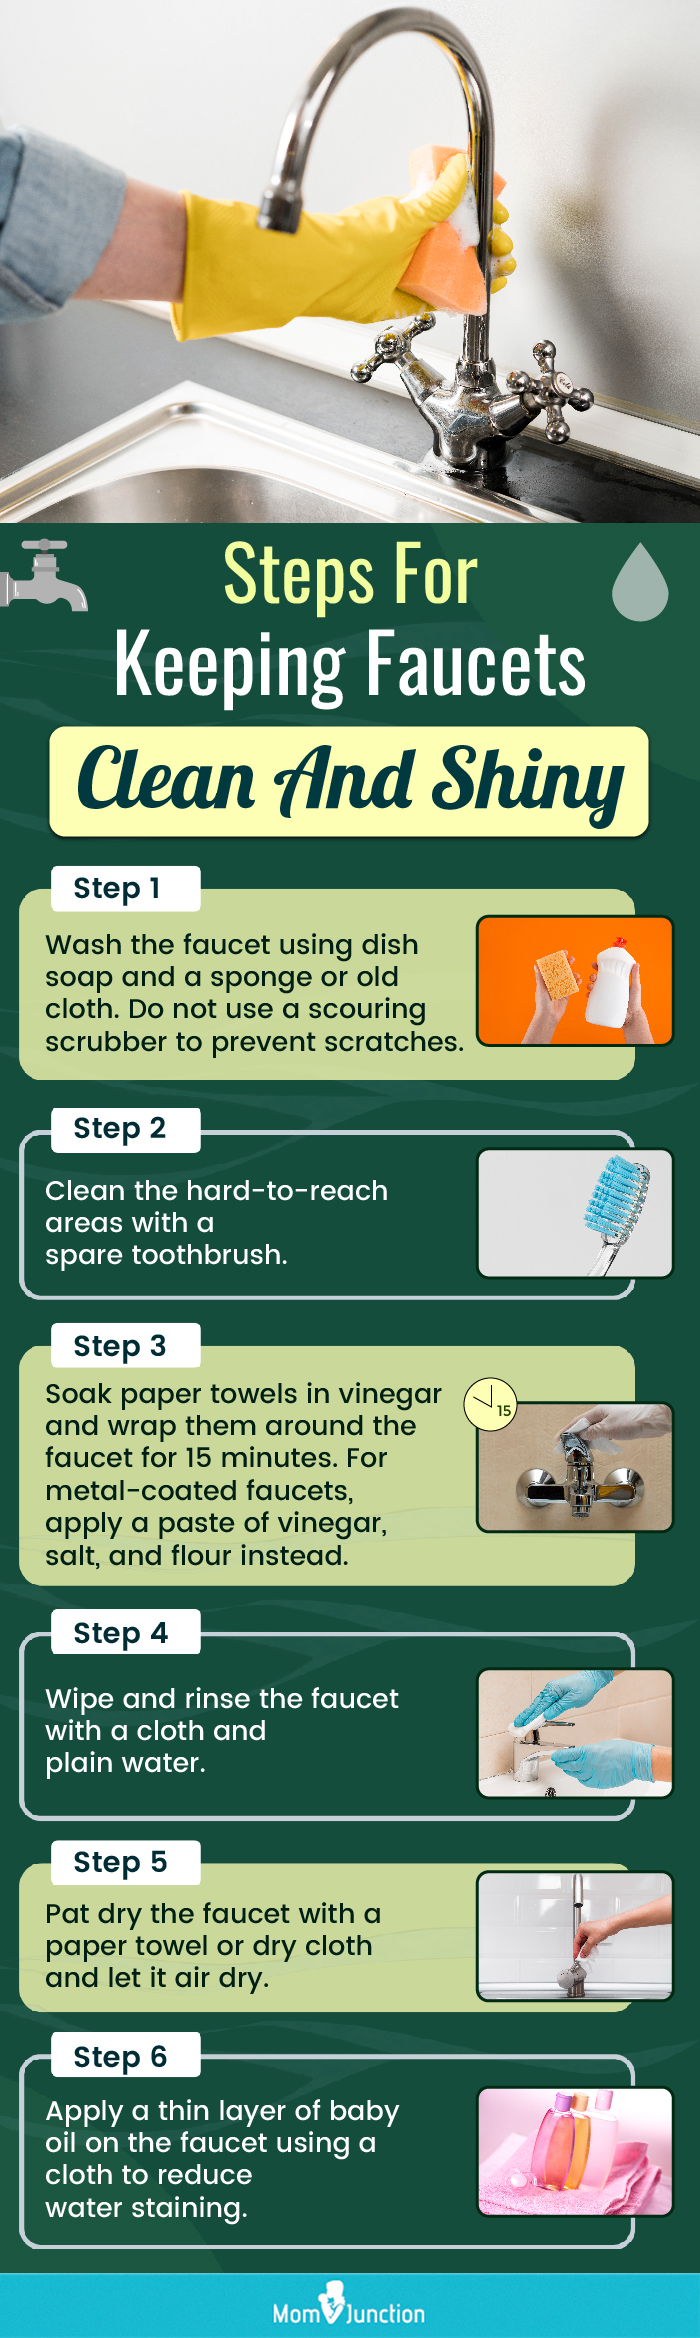 Steps For Keeping Faucets Clean And Shiny (infographic)